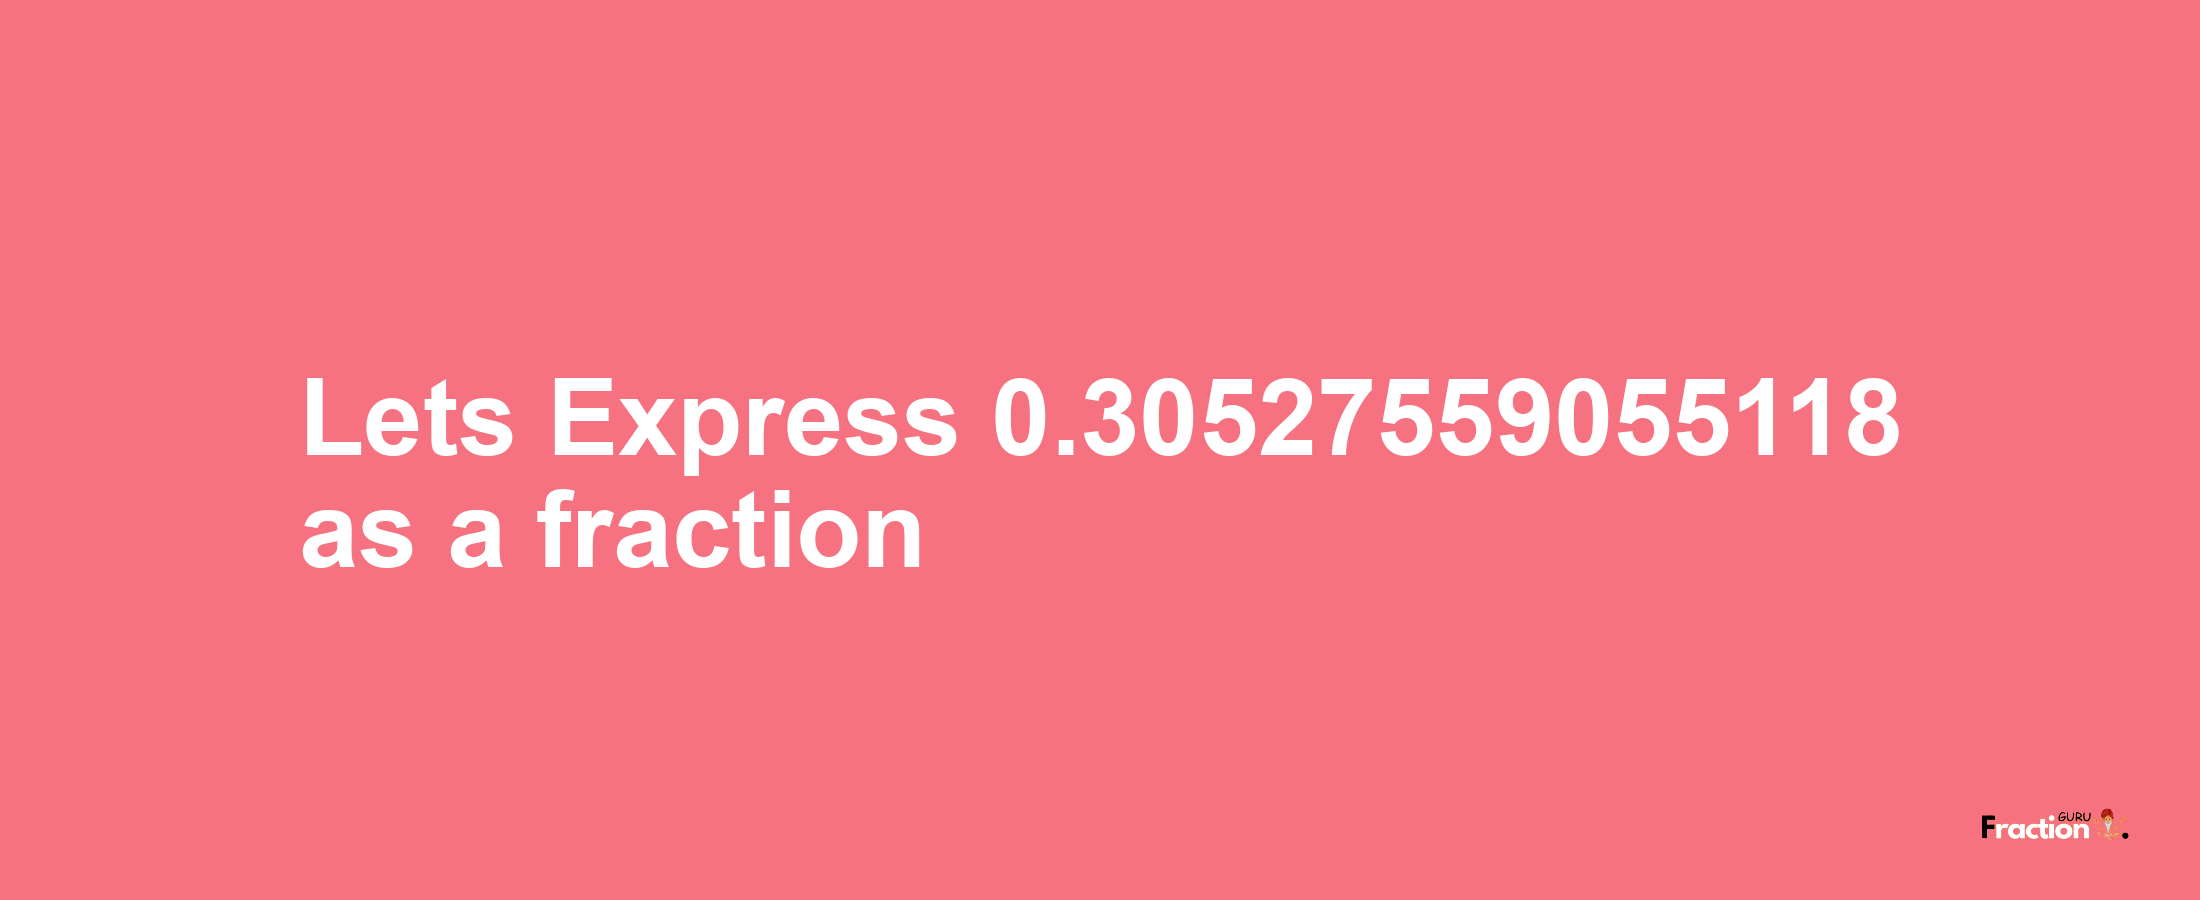 Lets Express 0.30527559055118 as afraction